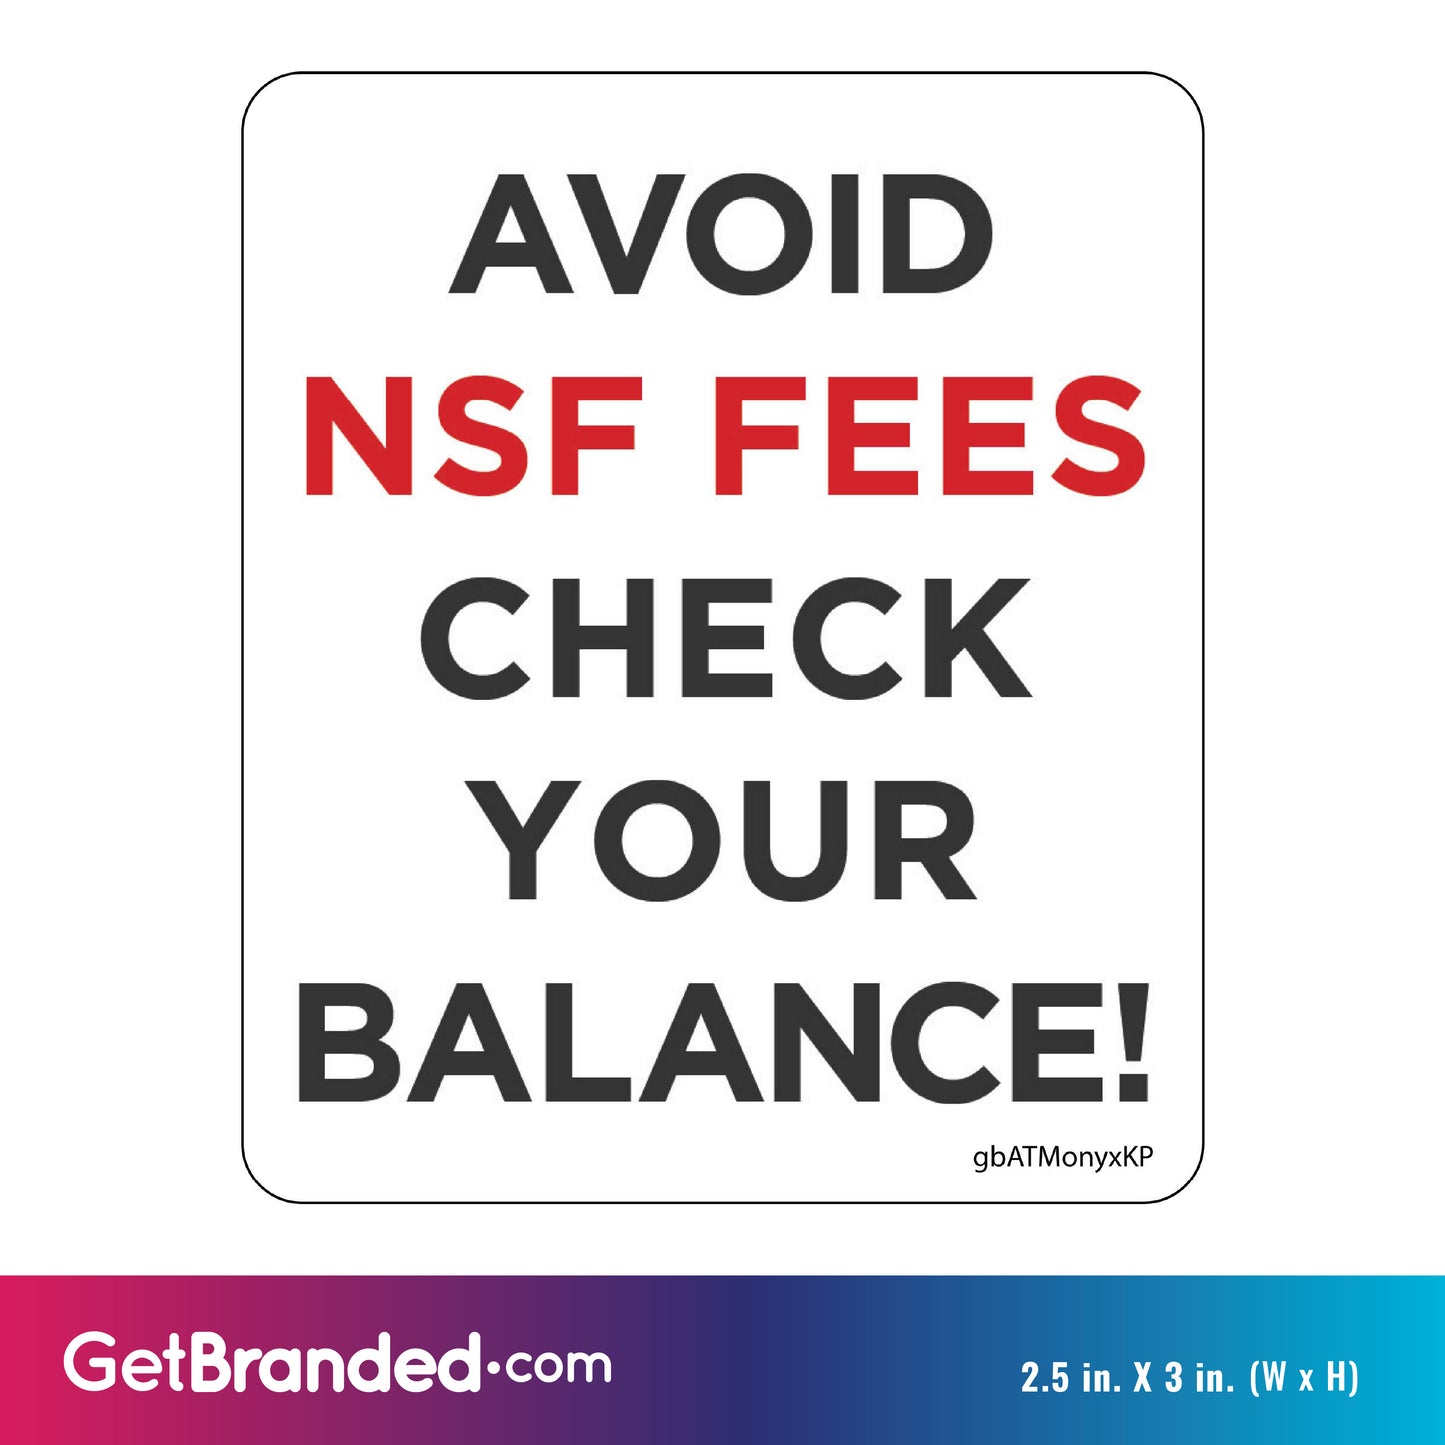 Avoid NSF Fees, Check Your Balance Decal size guide.